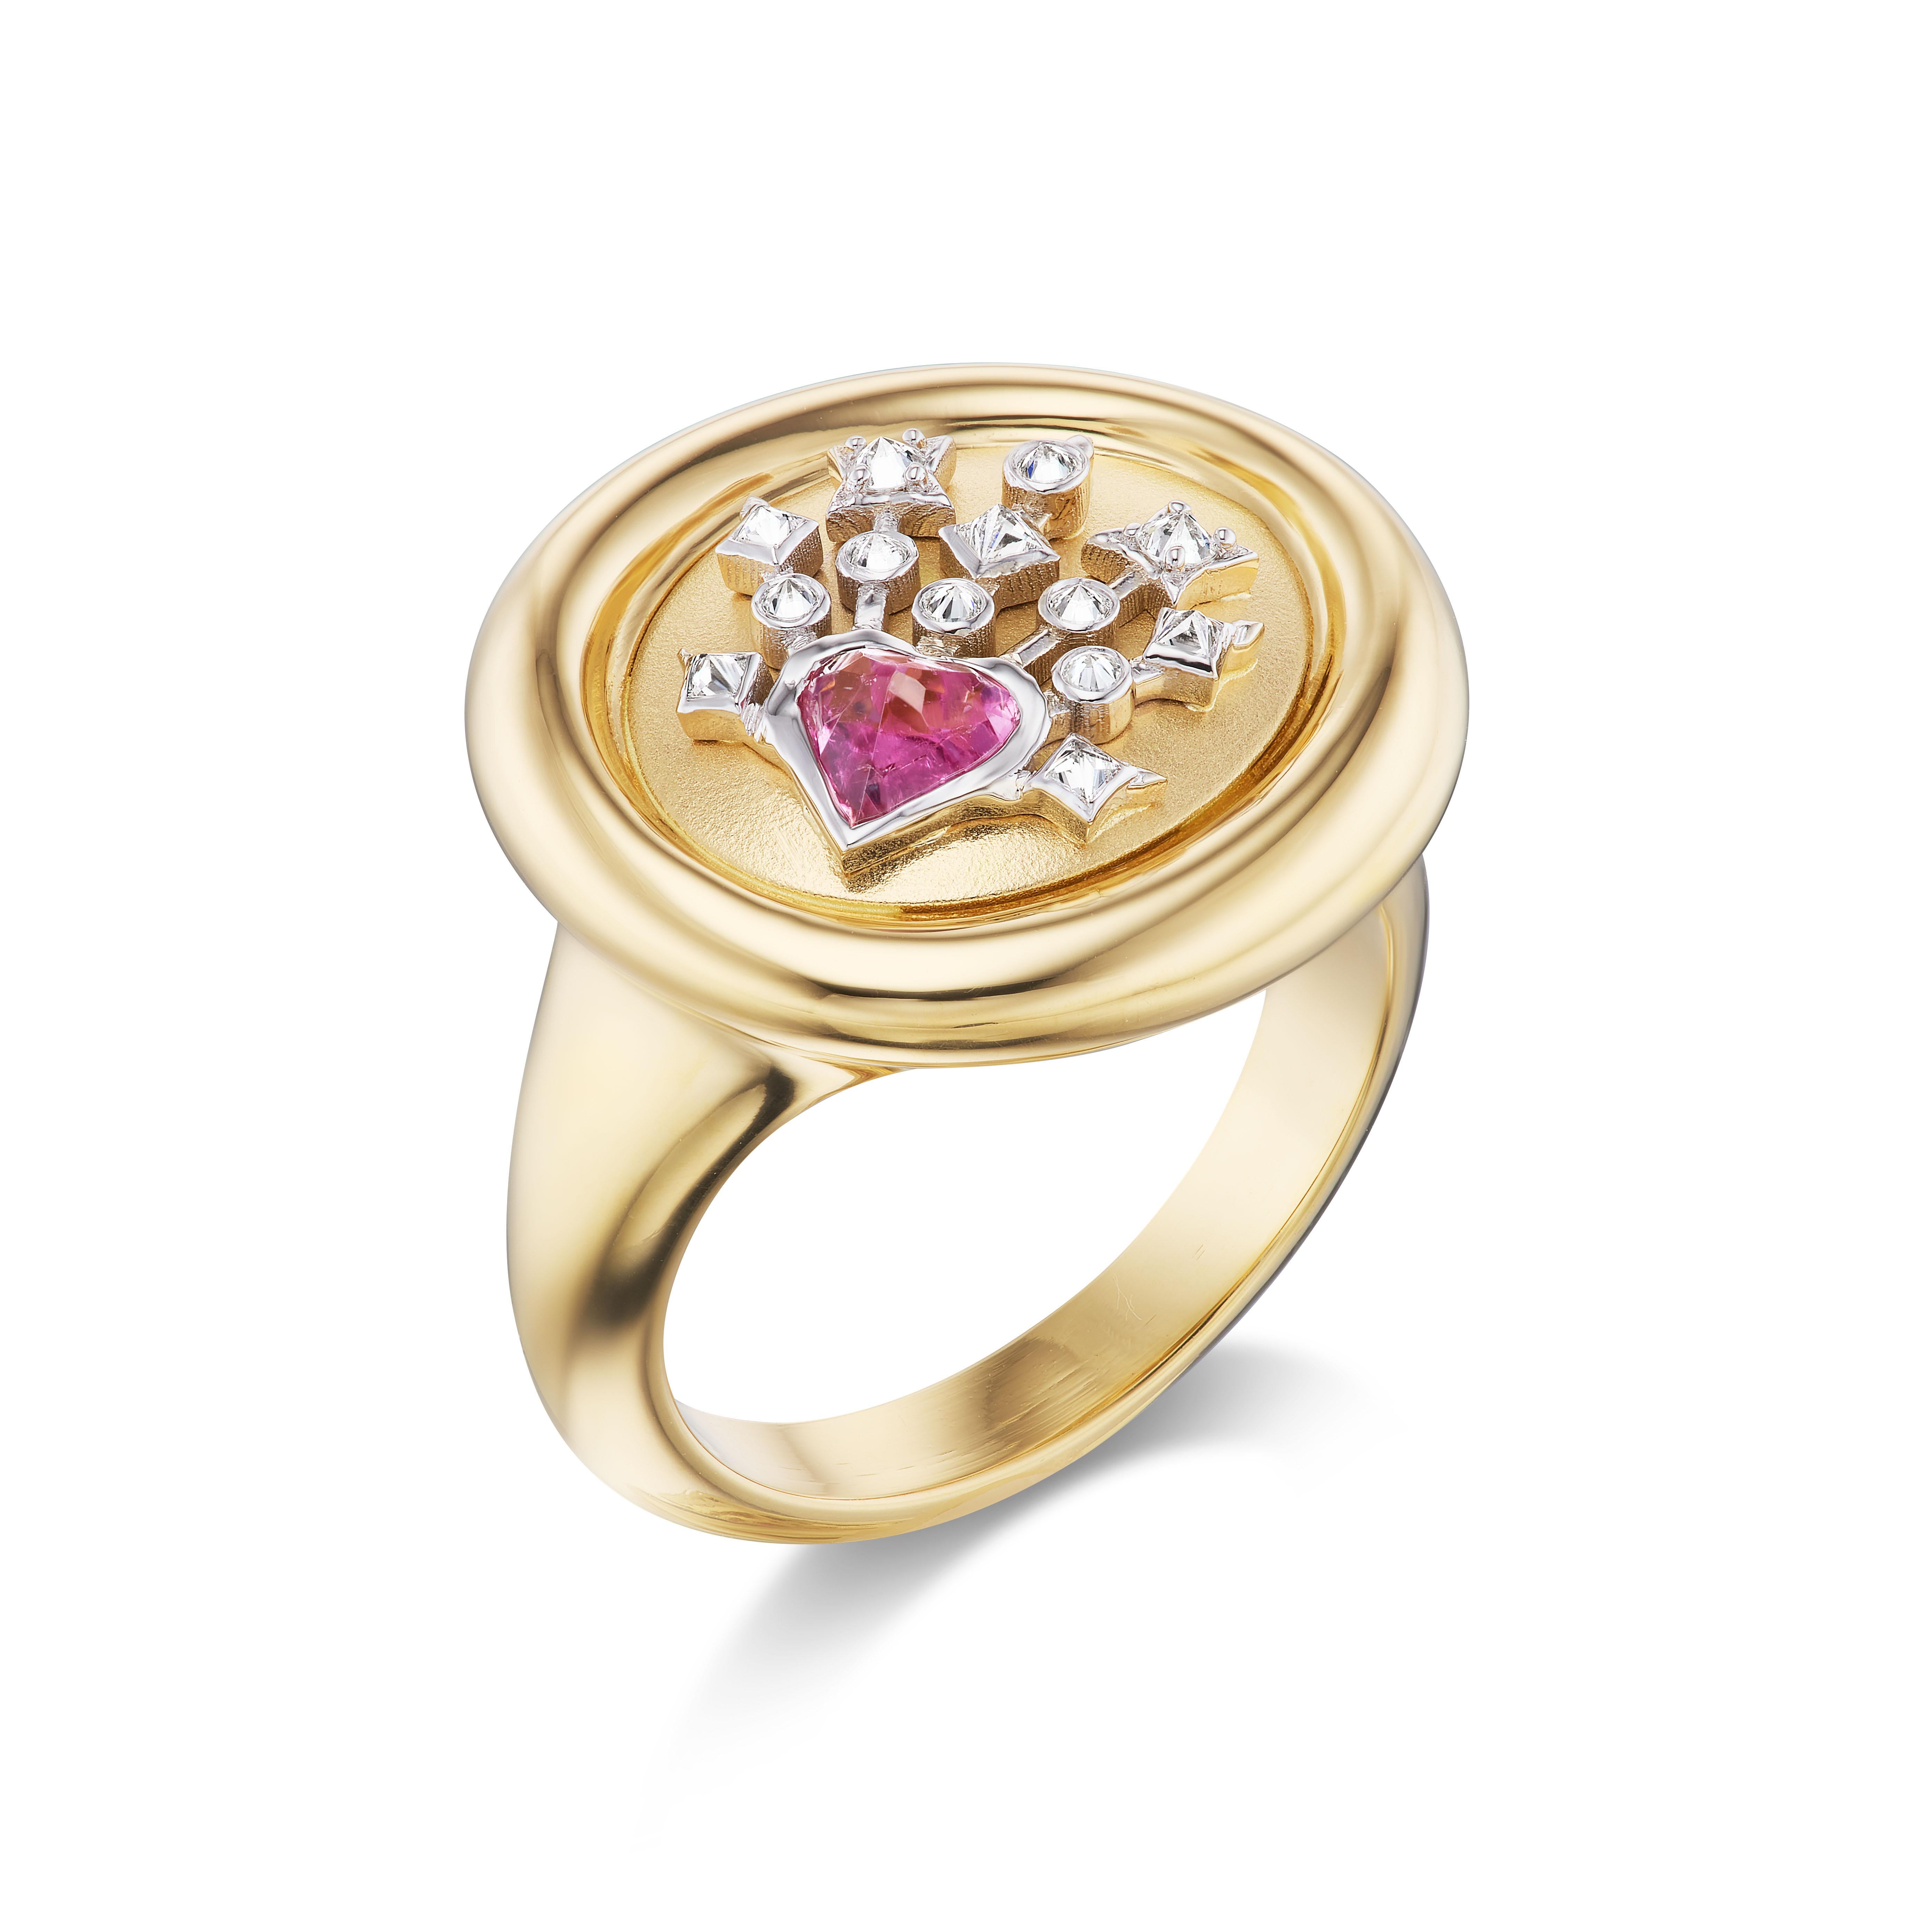 18K Yellow Gold, .06ct Diamonds, and .066 Pink Tourmaline

Design Inspiration

The first agreement inspired the Impeccable words collection in the Toltec book 